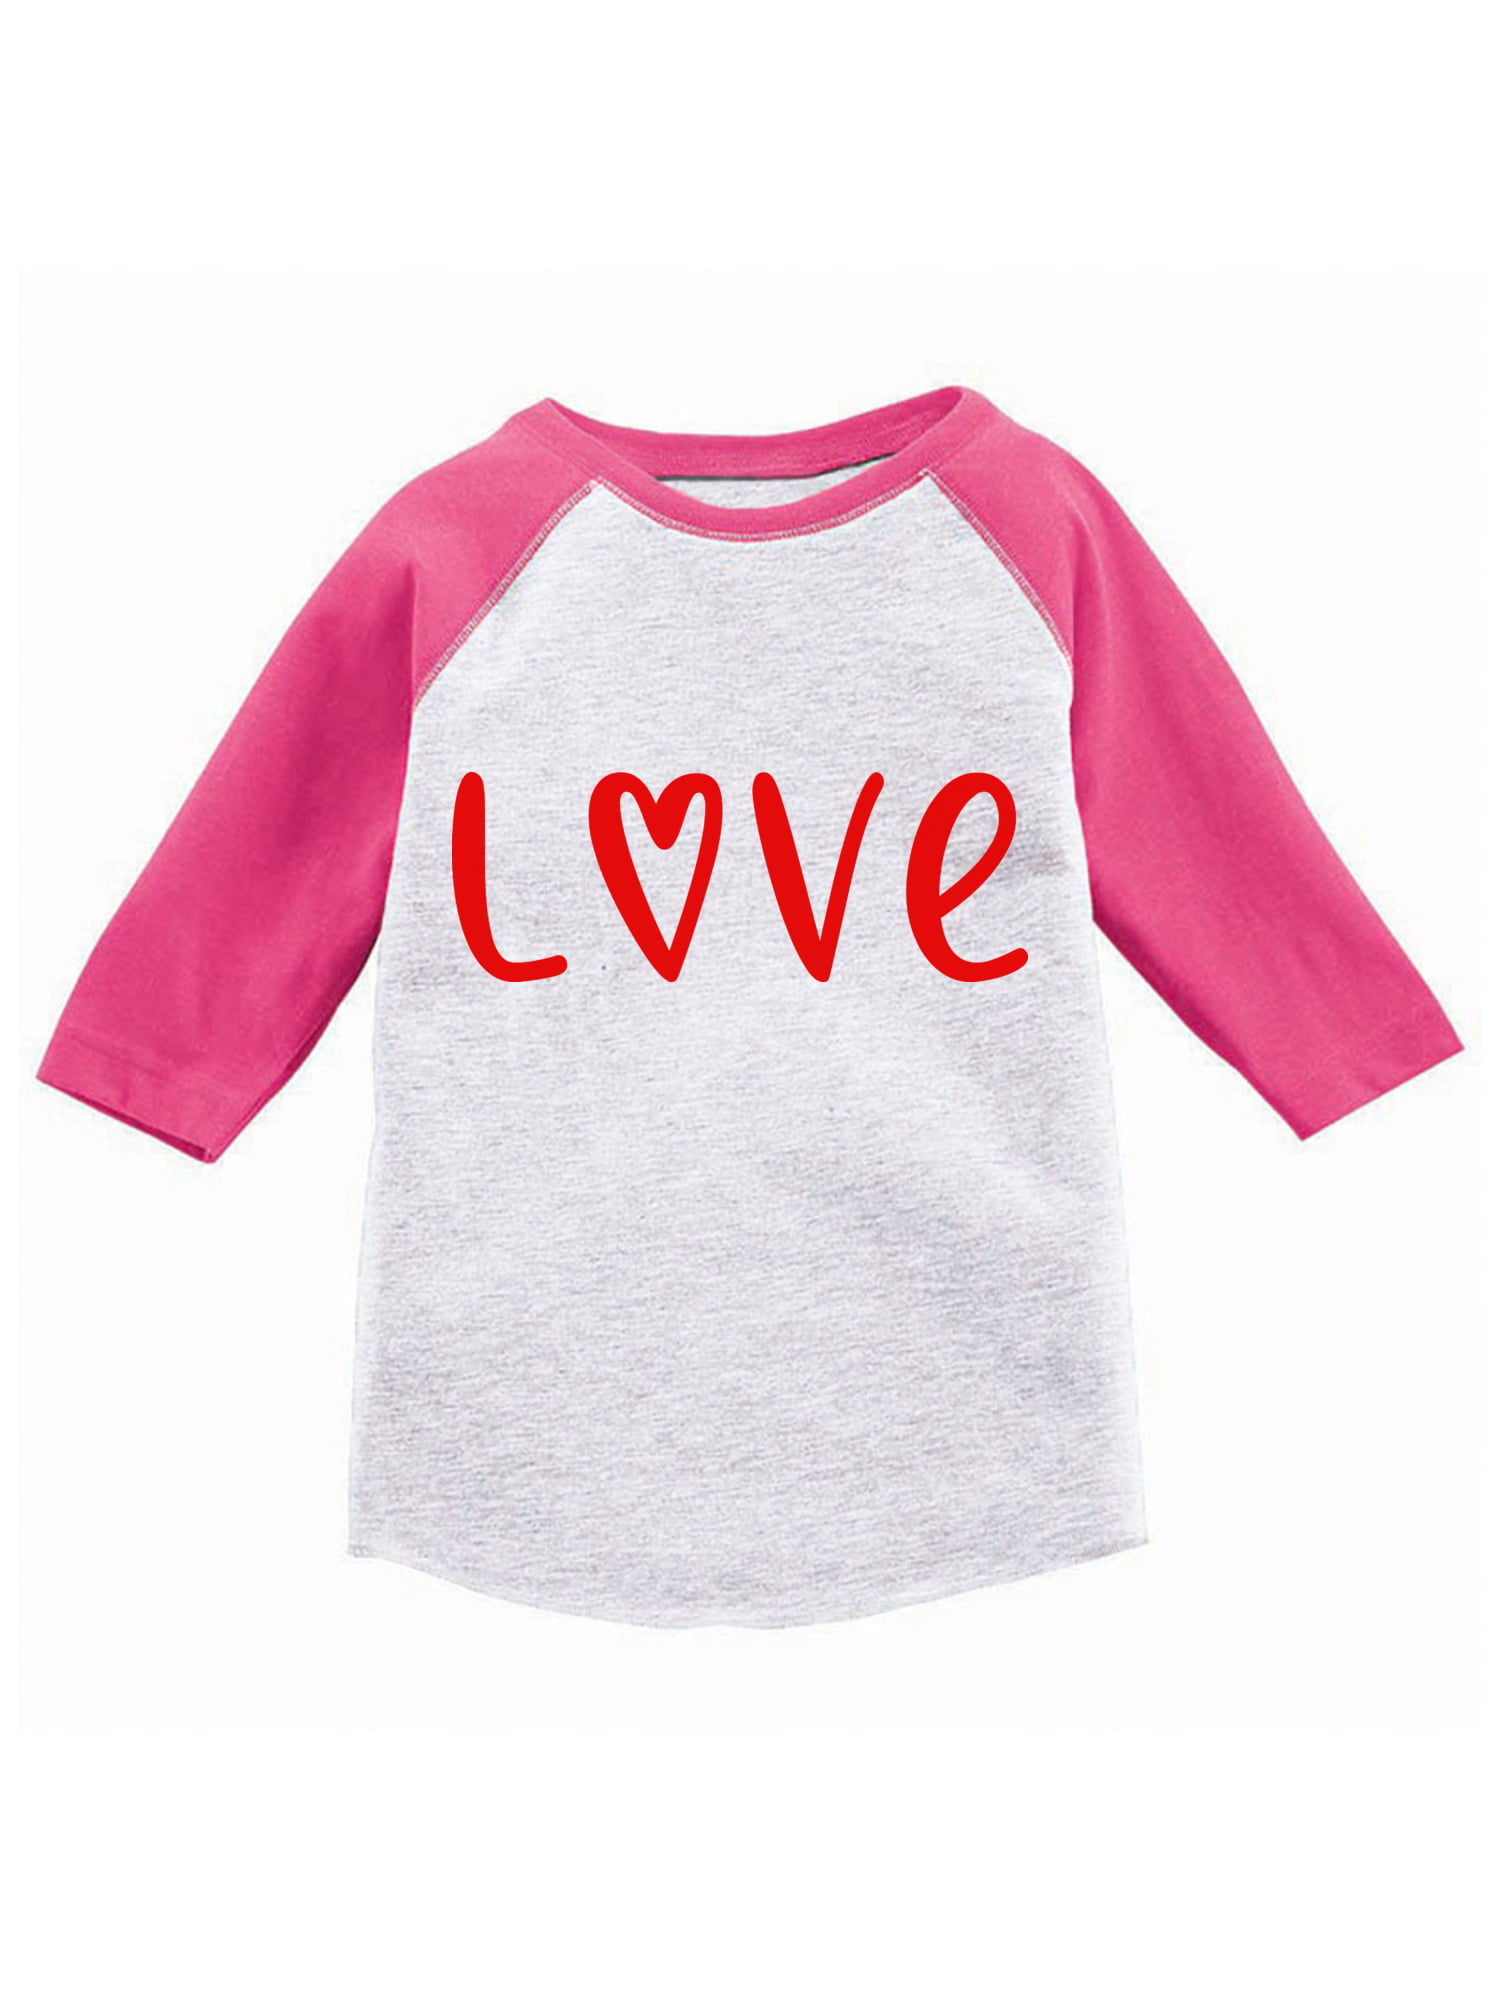 Valentines Day Raglan for Kids Toddler Boys Clothes 3t-4t 5 Year Old Girls Outfits Cute Love 6T Valentine's Unisex Tee